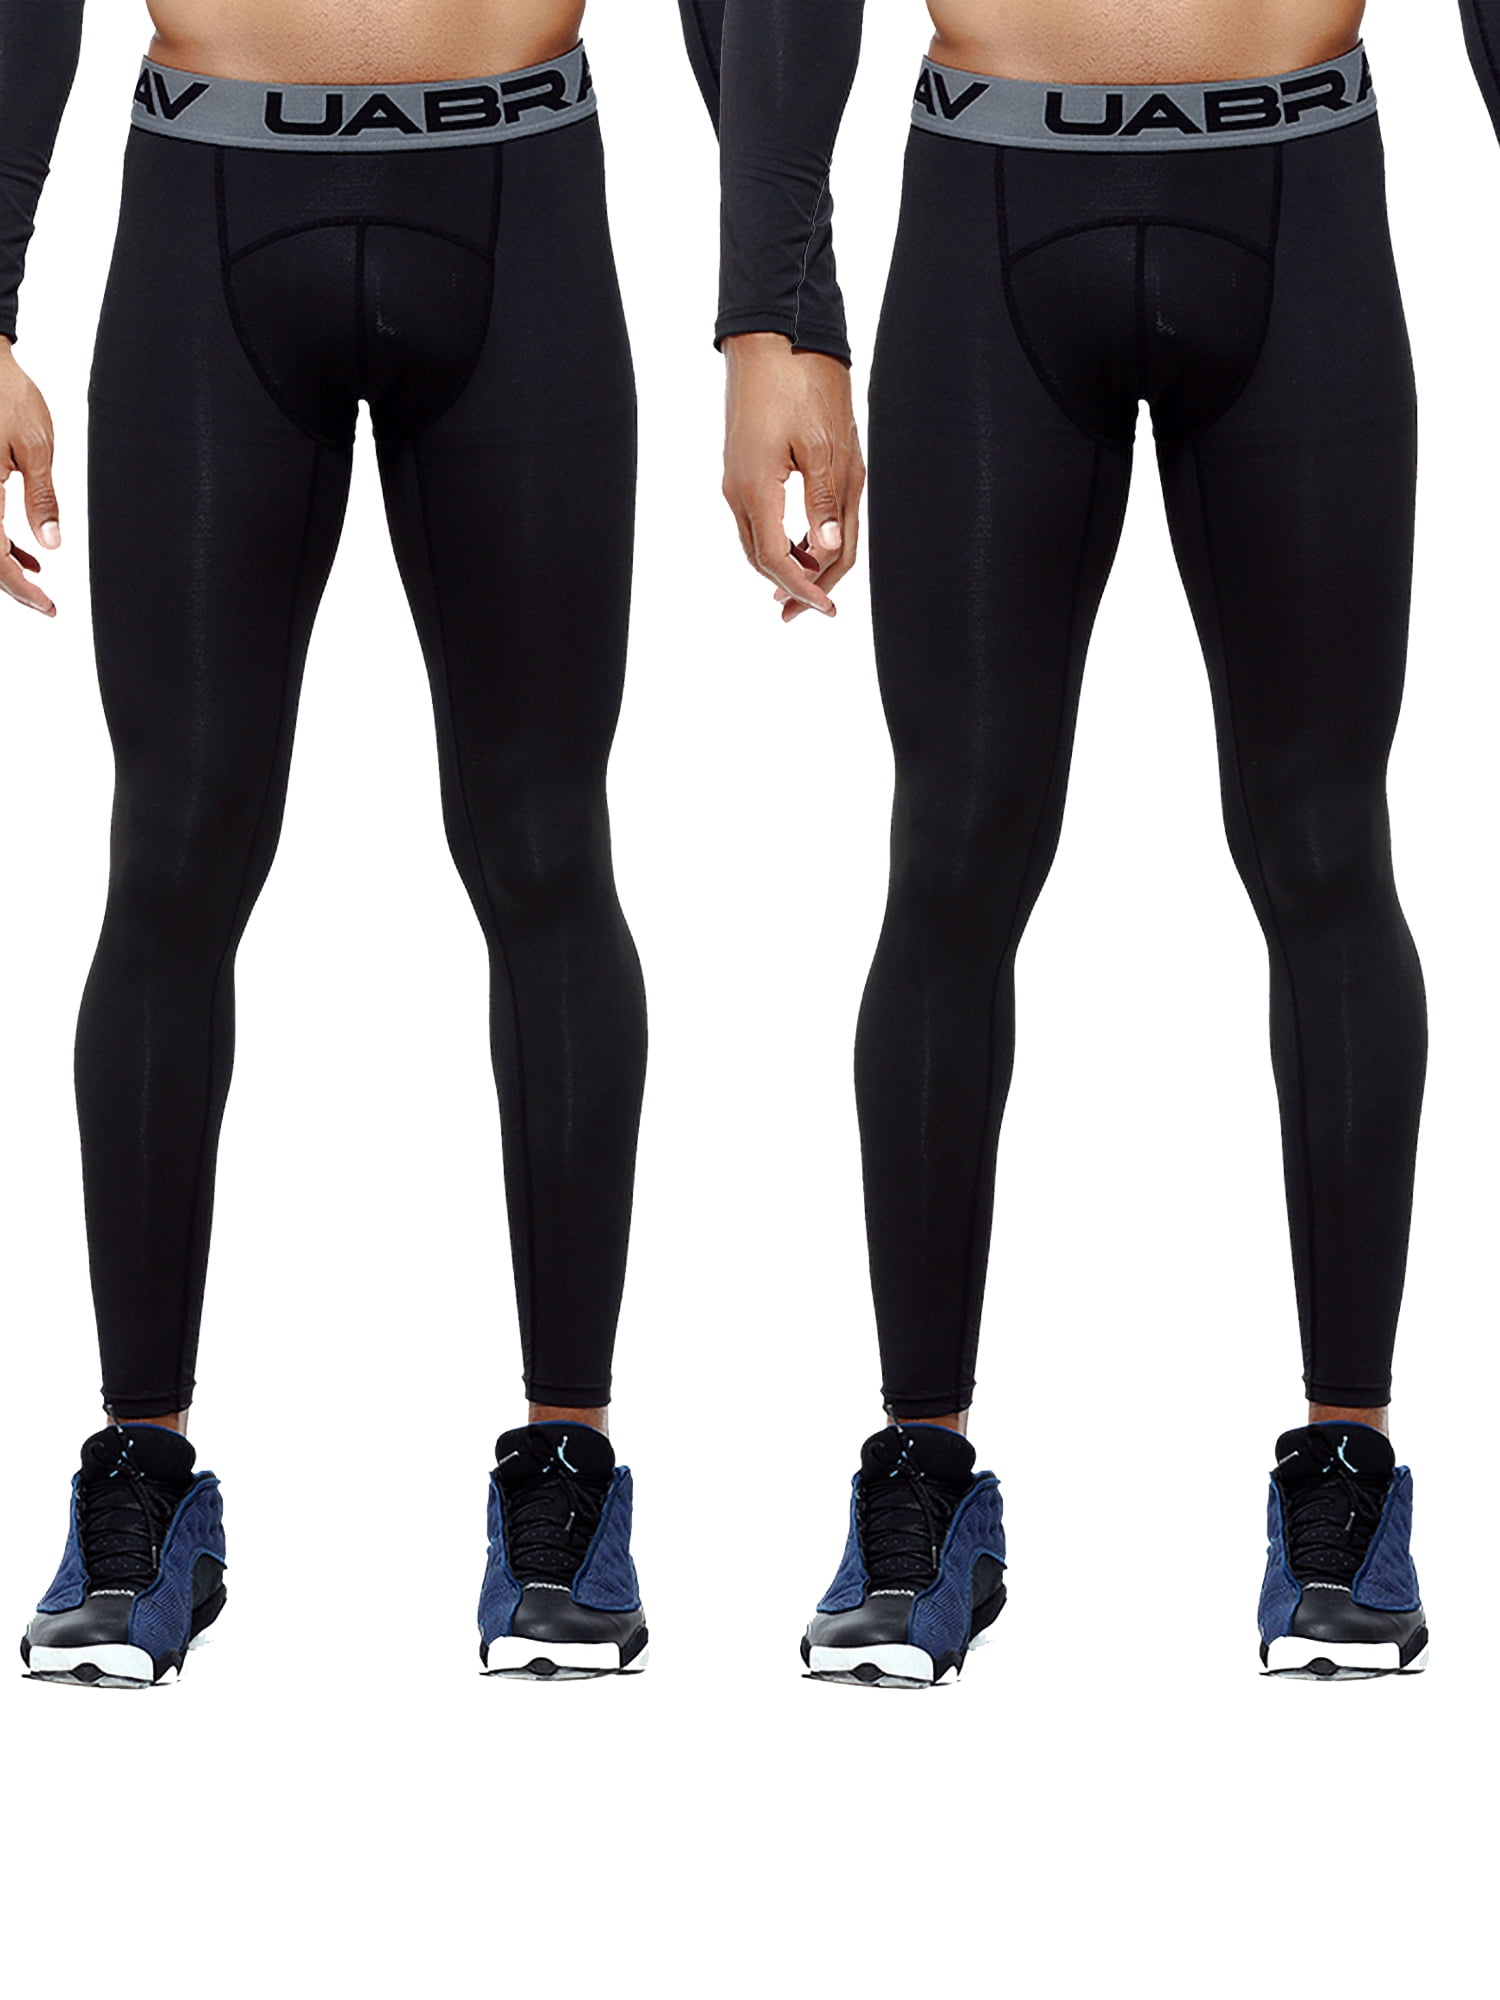 Mens Sports Workout Compression Fitness Running Base layer Tights Pants Cool Dry